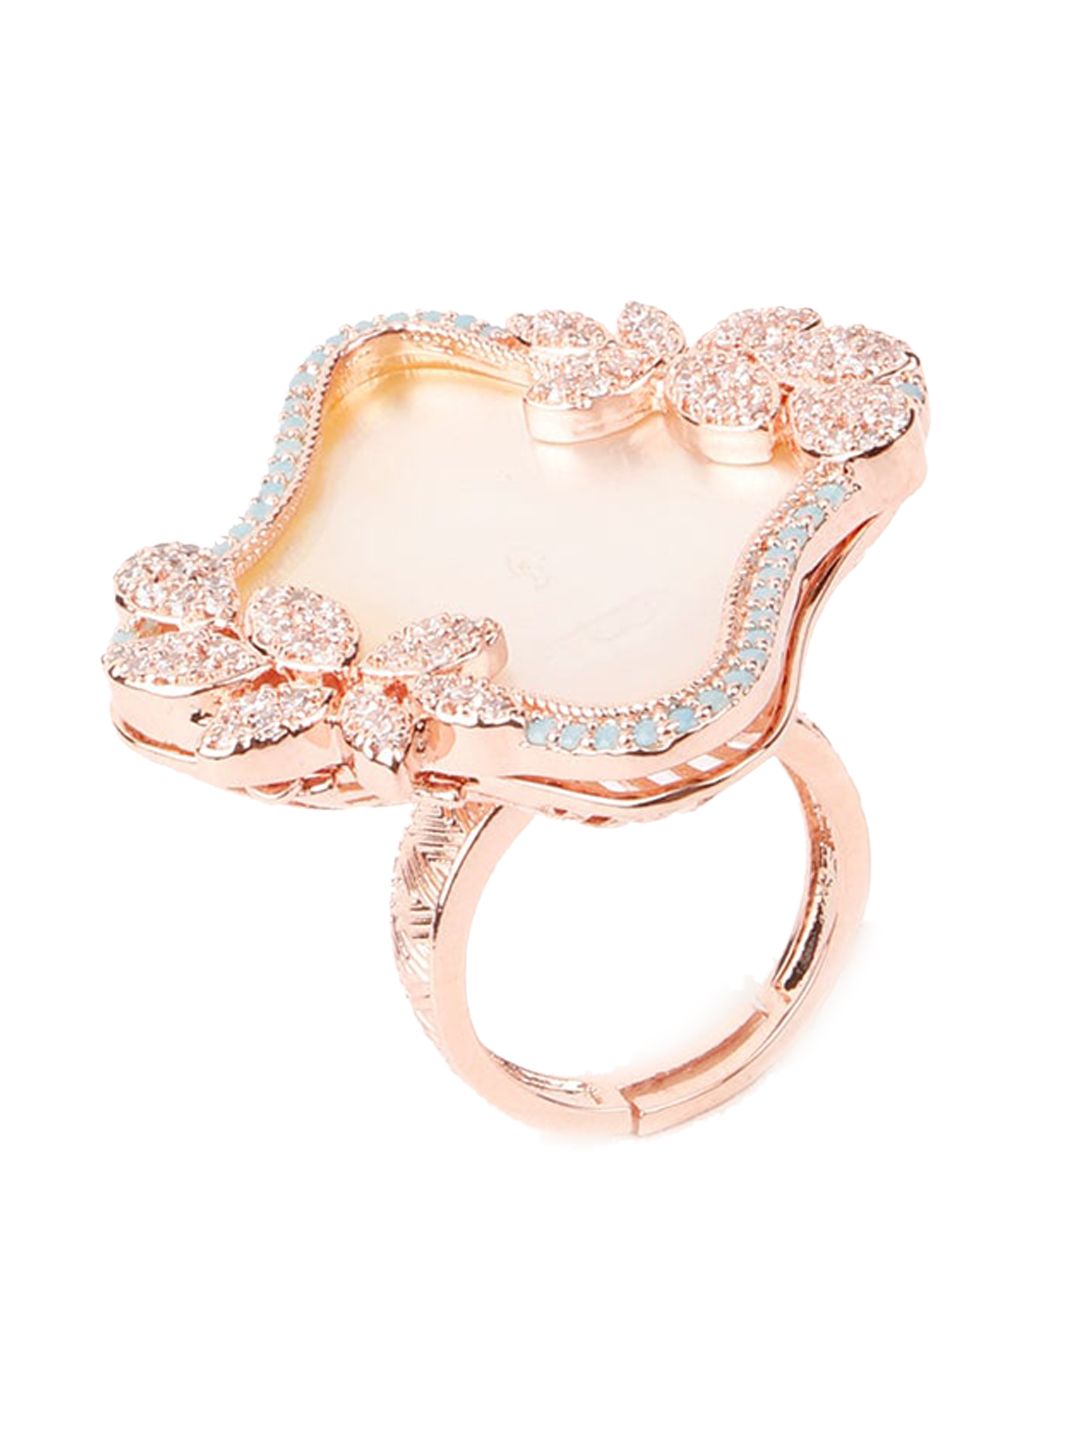 ODETTE Gold-Toned Stone-Studded Adjustable Finger Ring Price in India